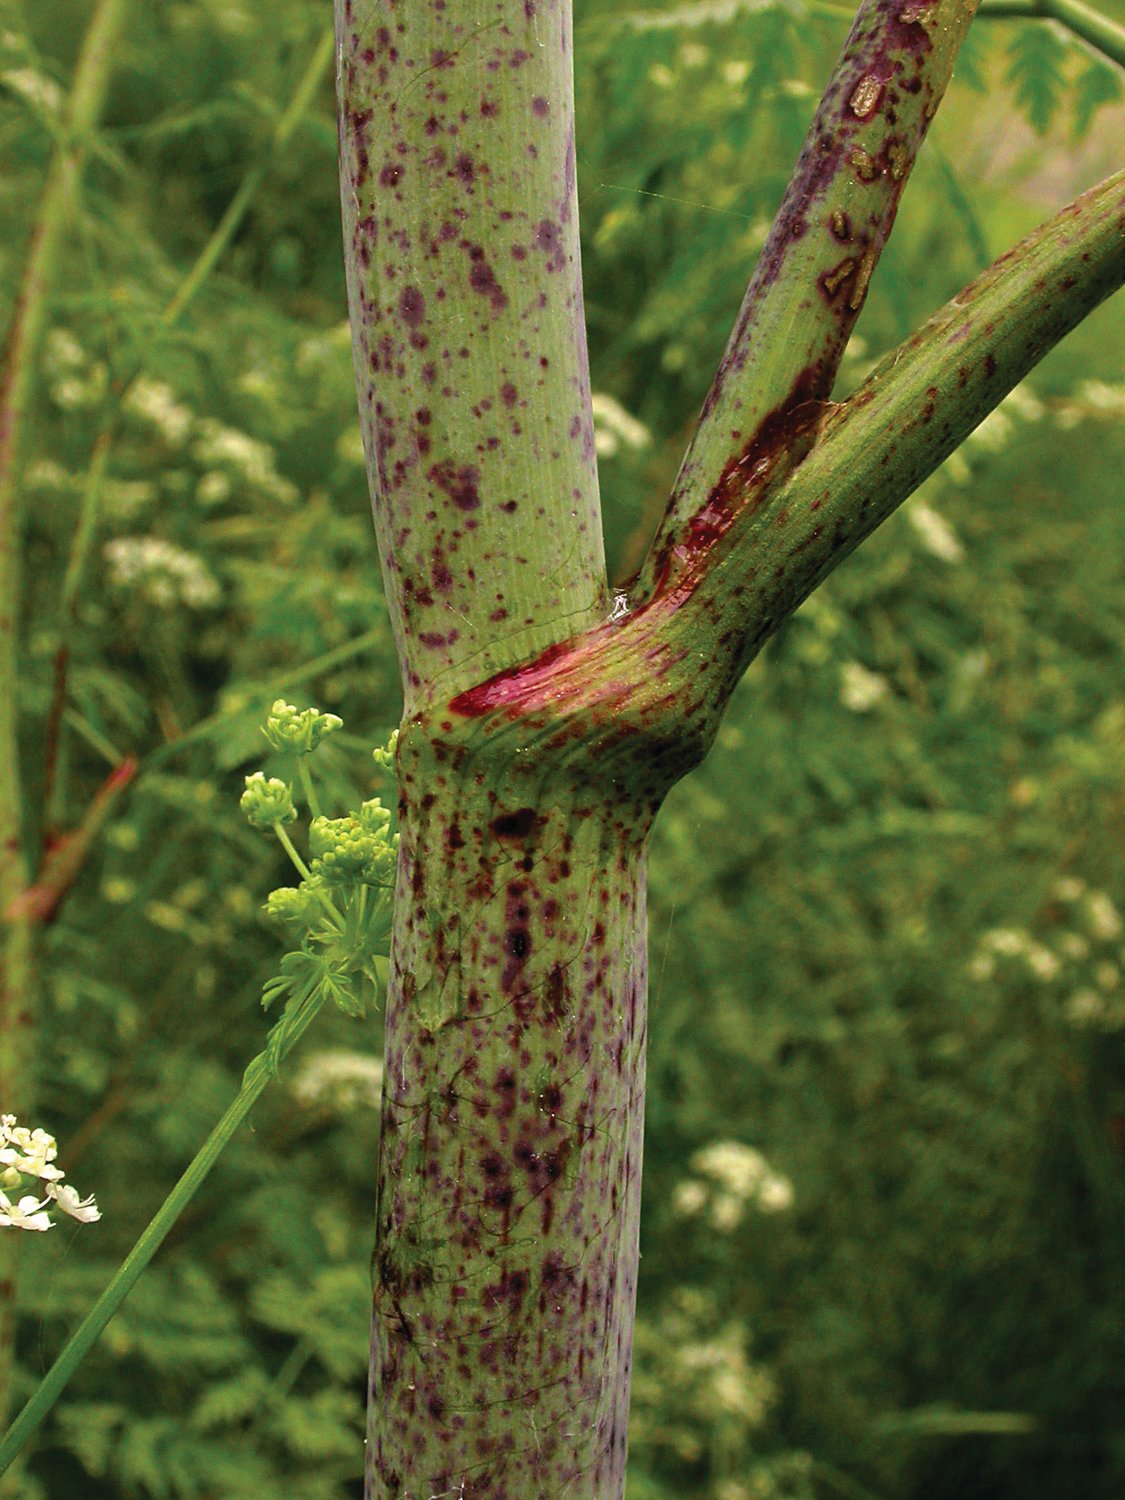 To help identify poison hemlock in home gardens, public trails, parks, or roadsides, note its smooth, hollow stem with purple blotches.